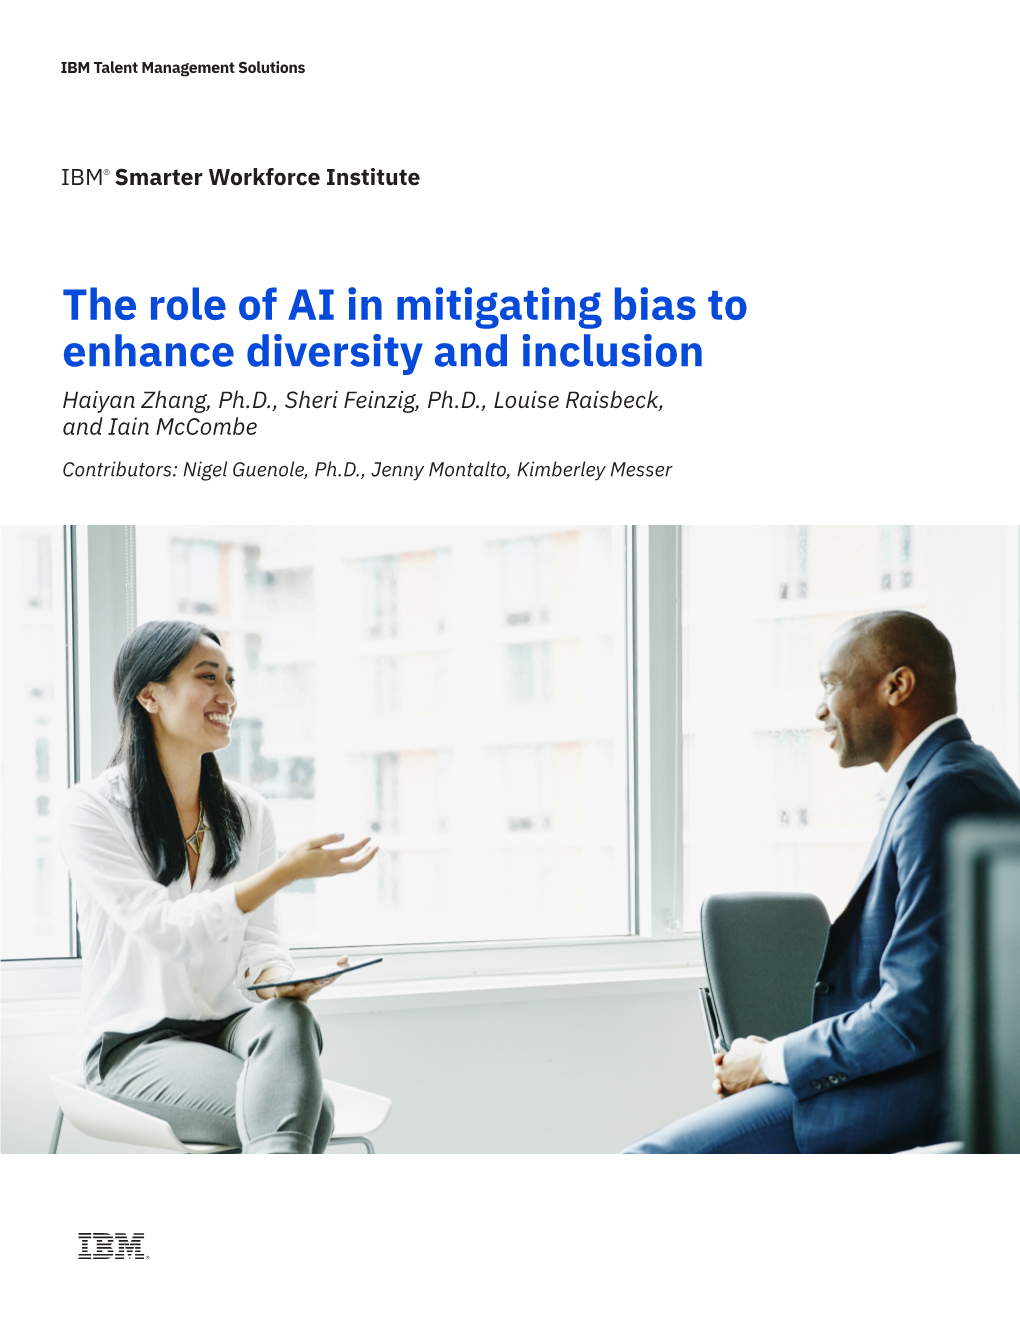 The Role of AI in Mitigating Bias to Enhance Diversity and Inclusion Haiyan Zhang, Ph.D., Sheri Feinzig, Ph.D., Louise Raisbeck, and Iain Mccombe